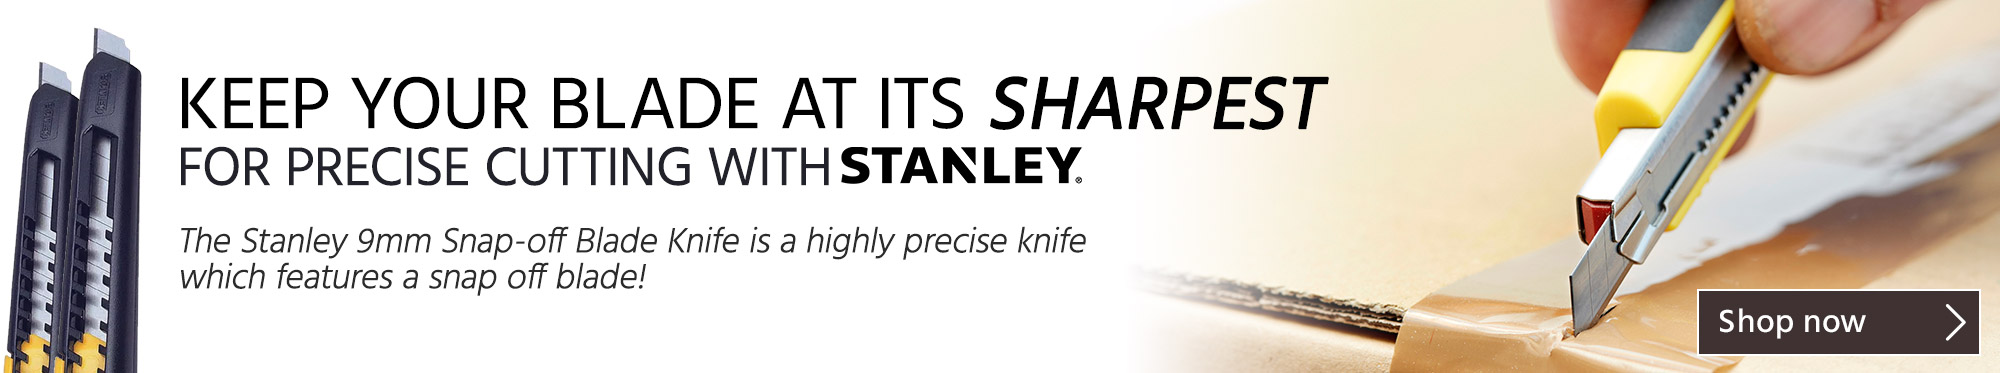 Precise Cutting with Stanley